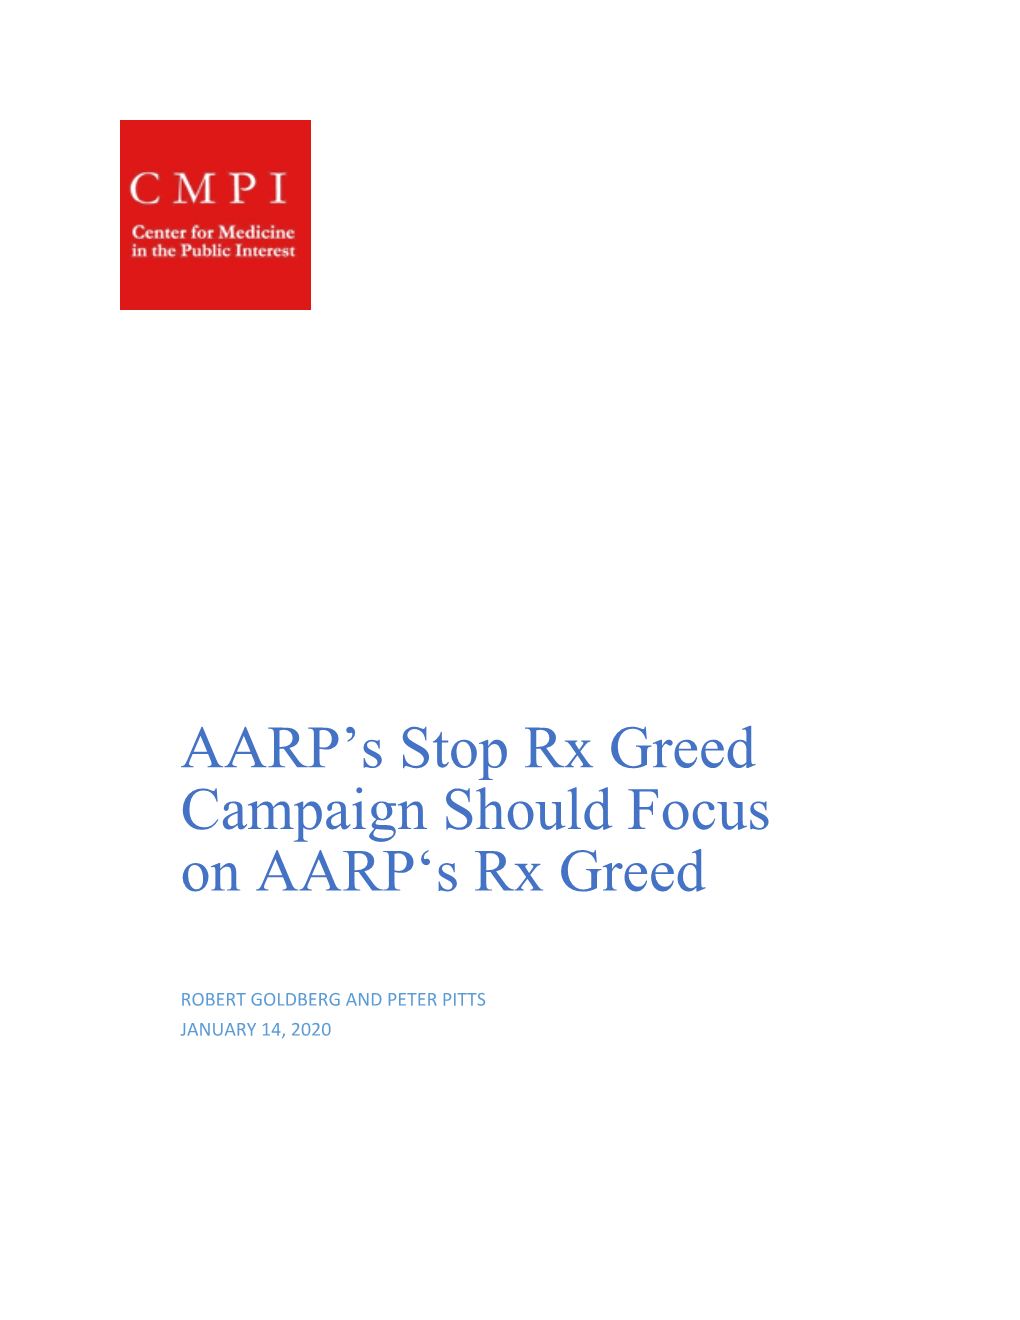 AARP's Stop Rx Greed Campaign Should Focus on AARP's Rx Greed